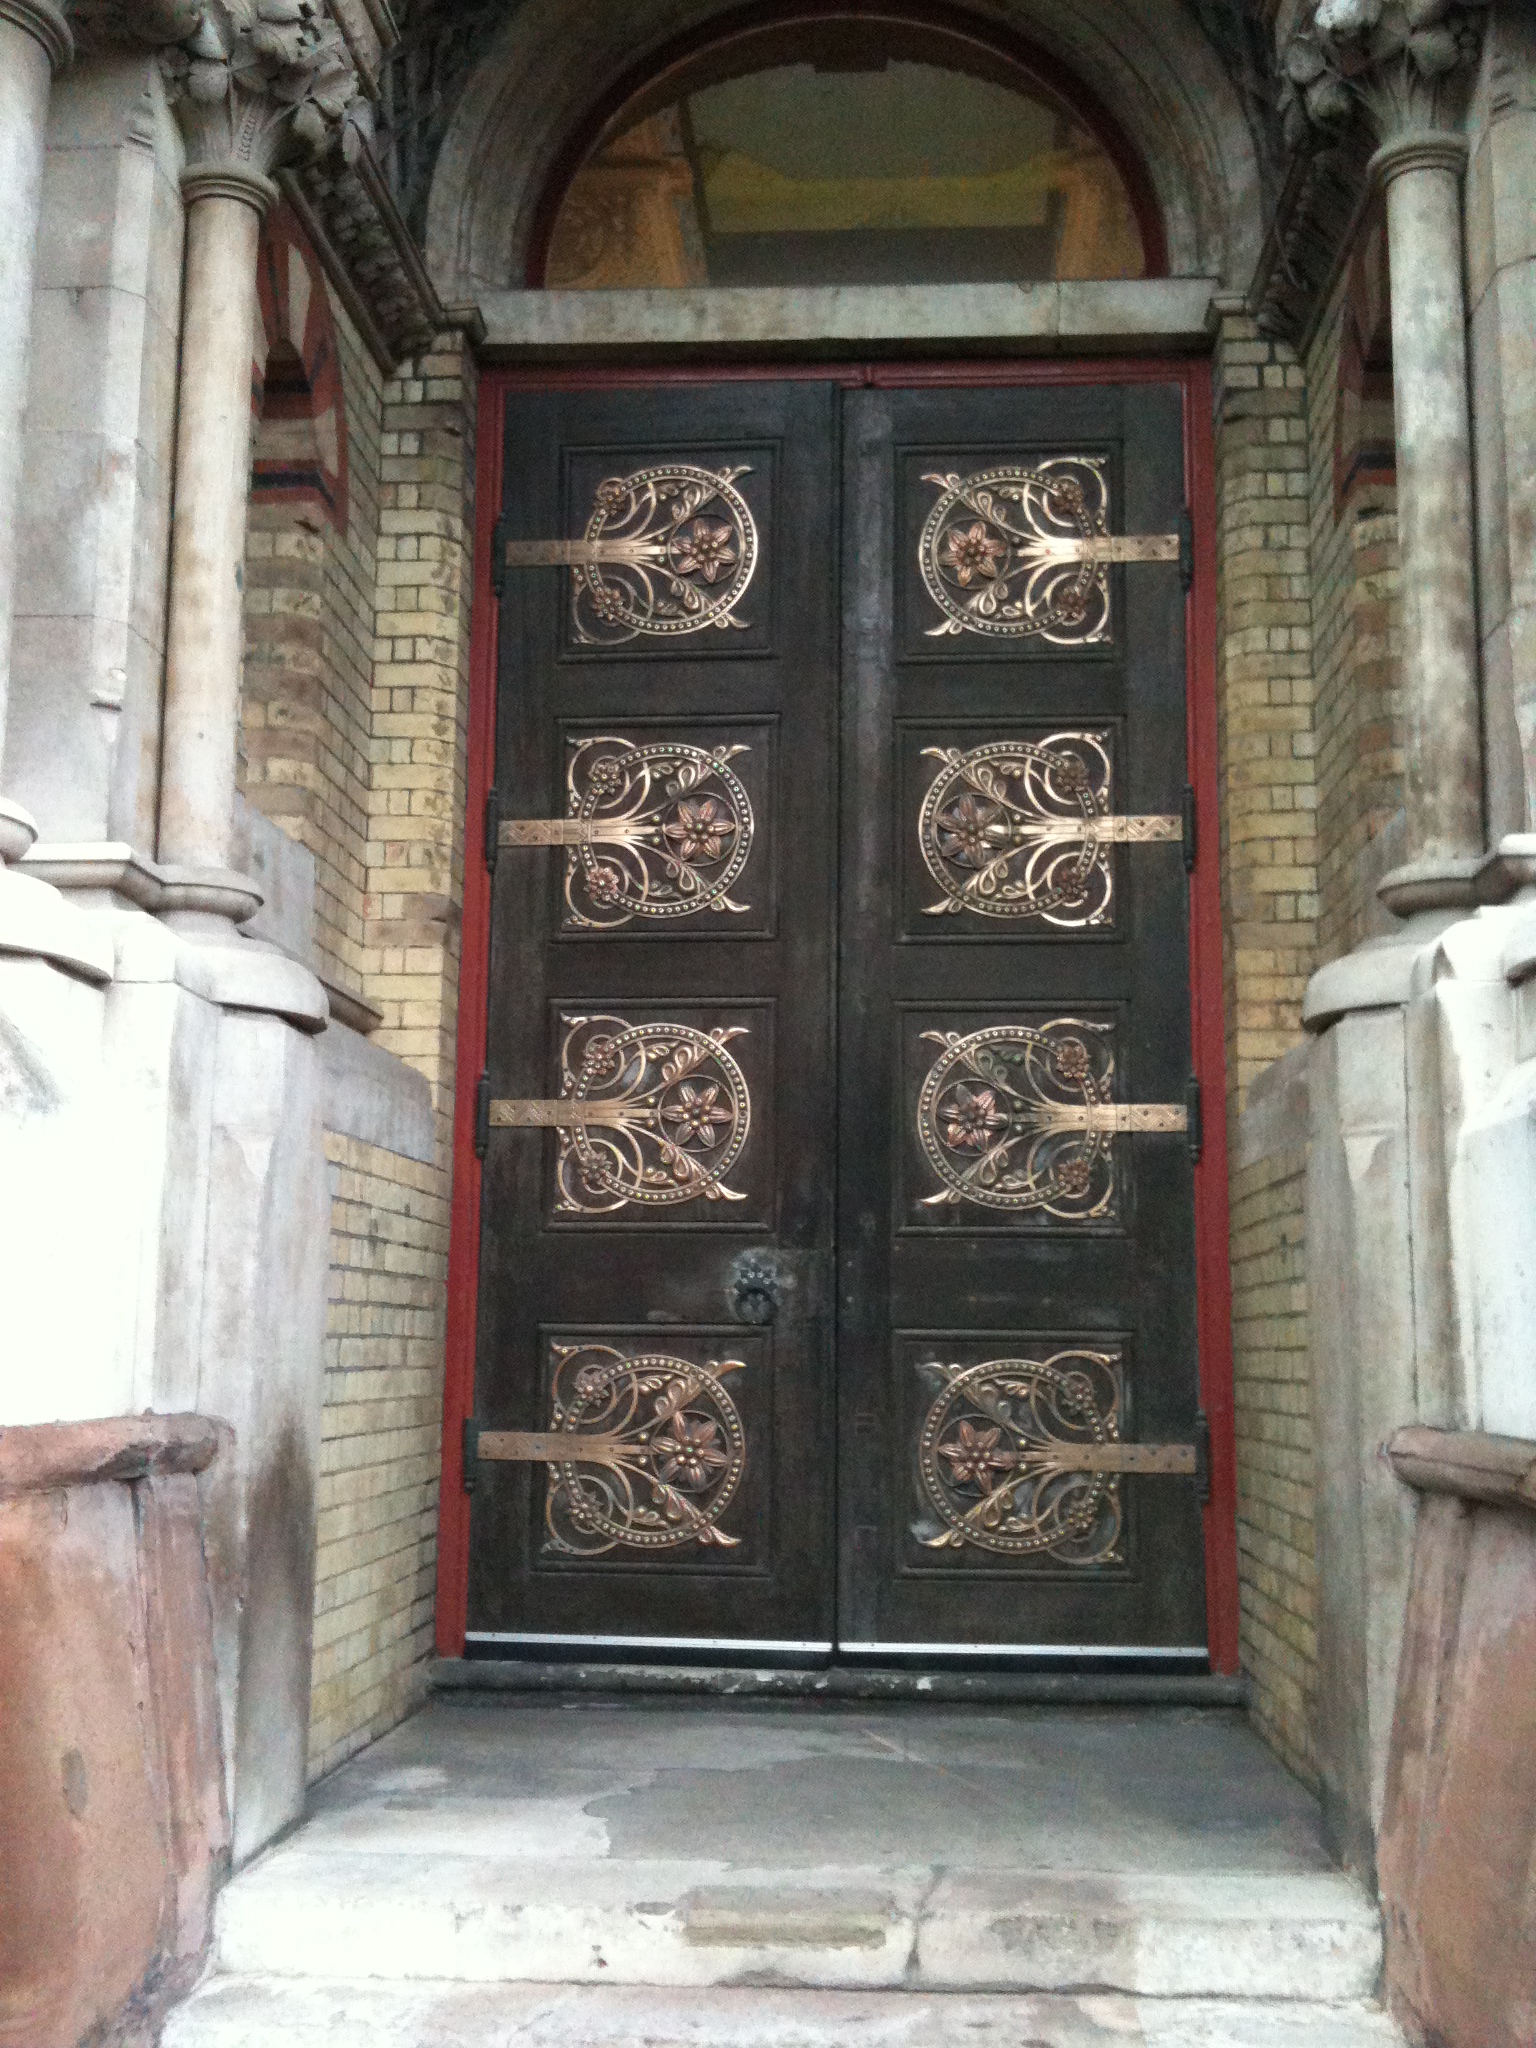 the doorway to the building is decorated with intricate ironwork